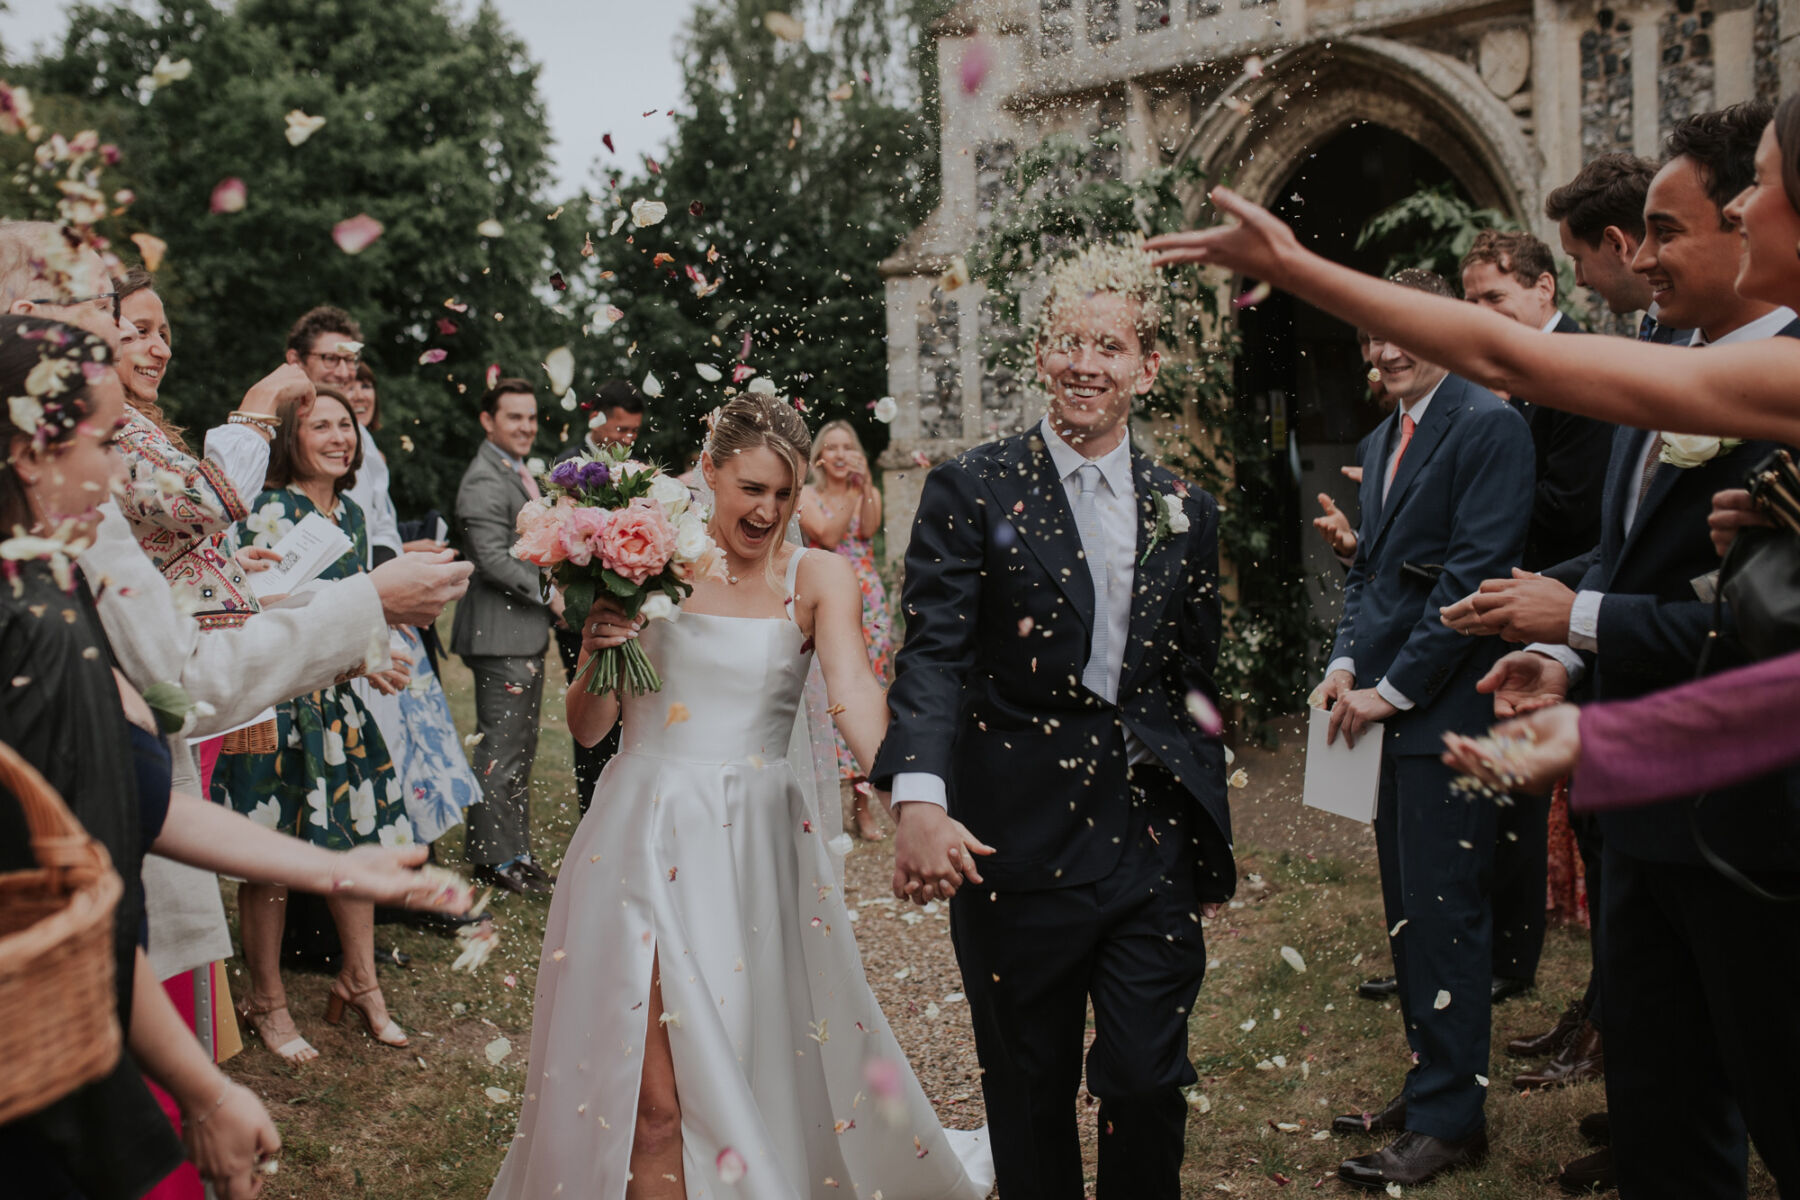 Confetti thrown outside the church, bride and groom laughing